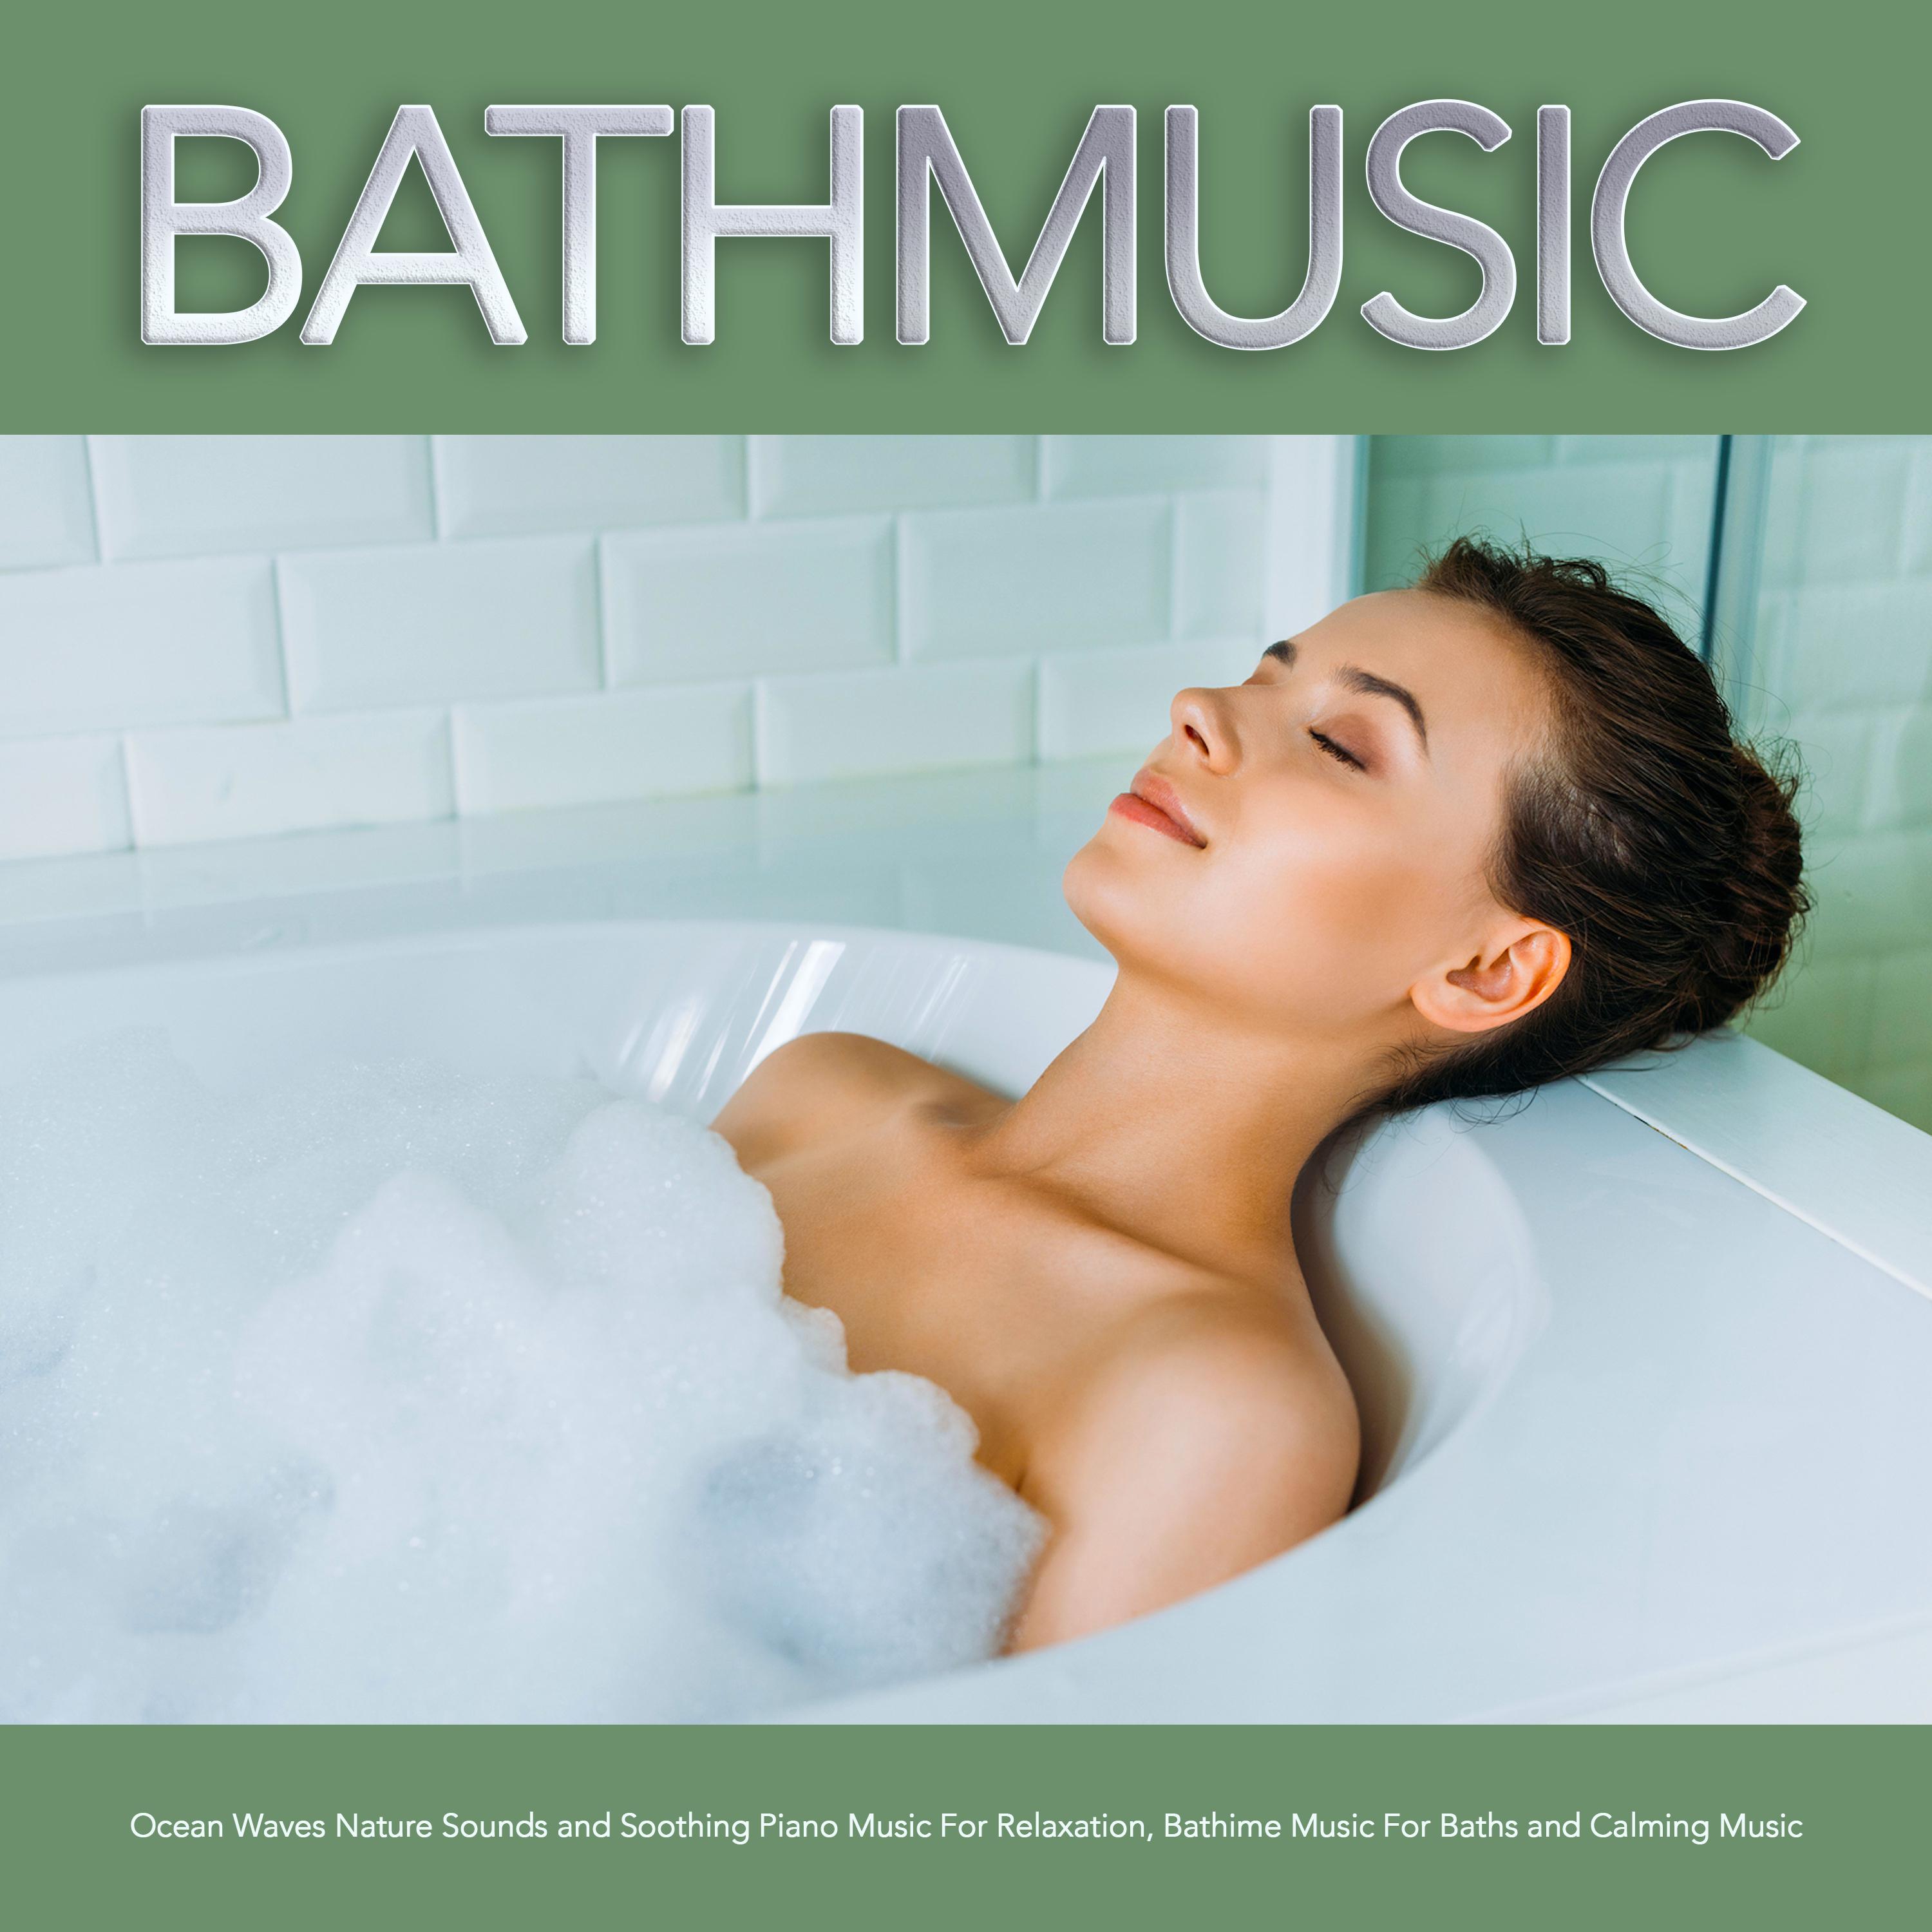 Music For Baths With Ocean Waves